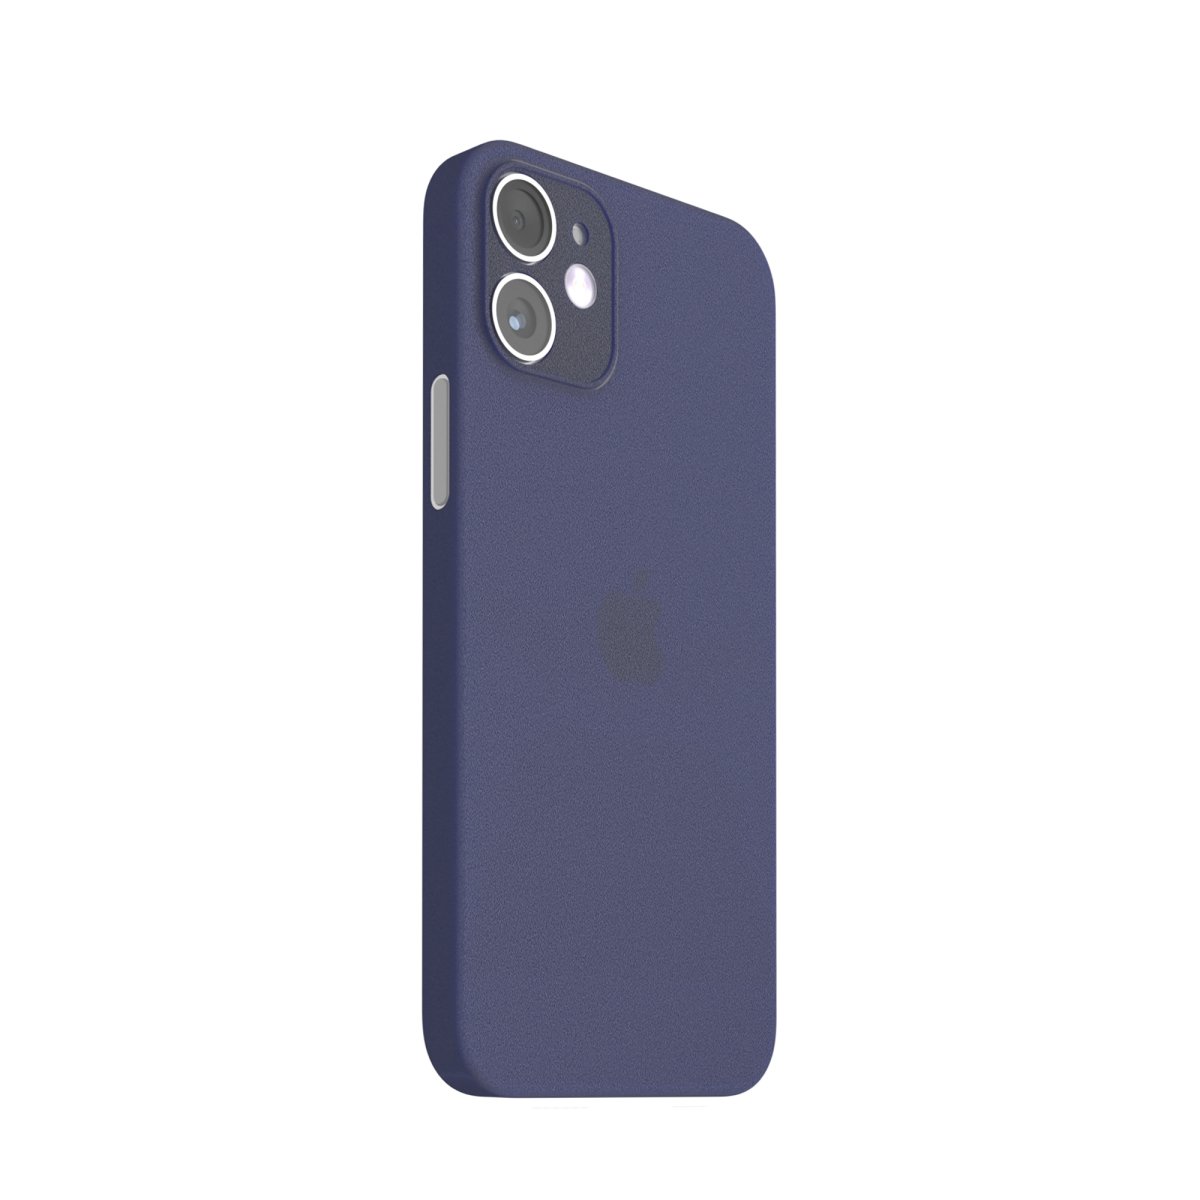 Slimcase Mobile Back Cover for iPhone 12 Mini - Slimcase IndiaCase